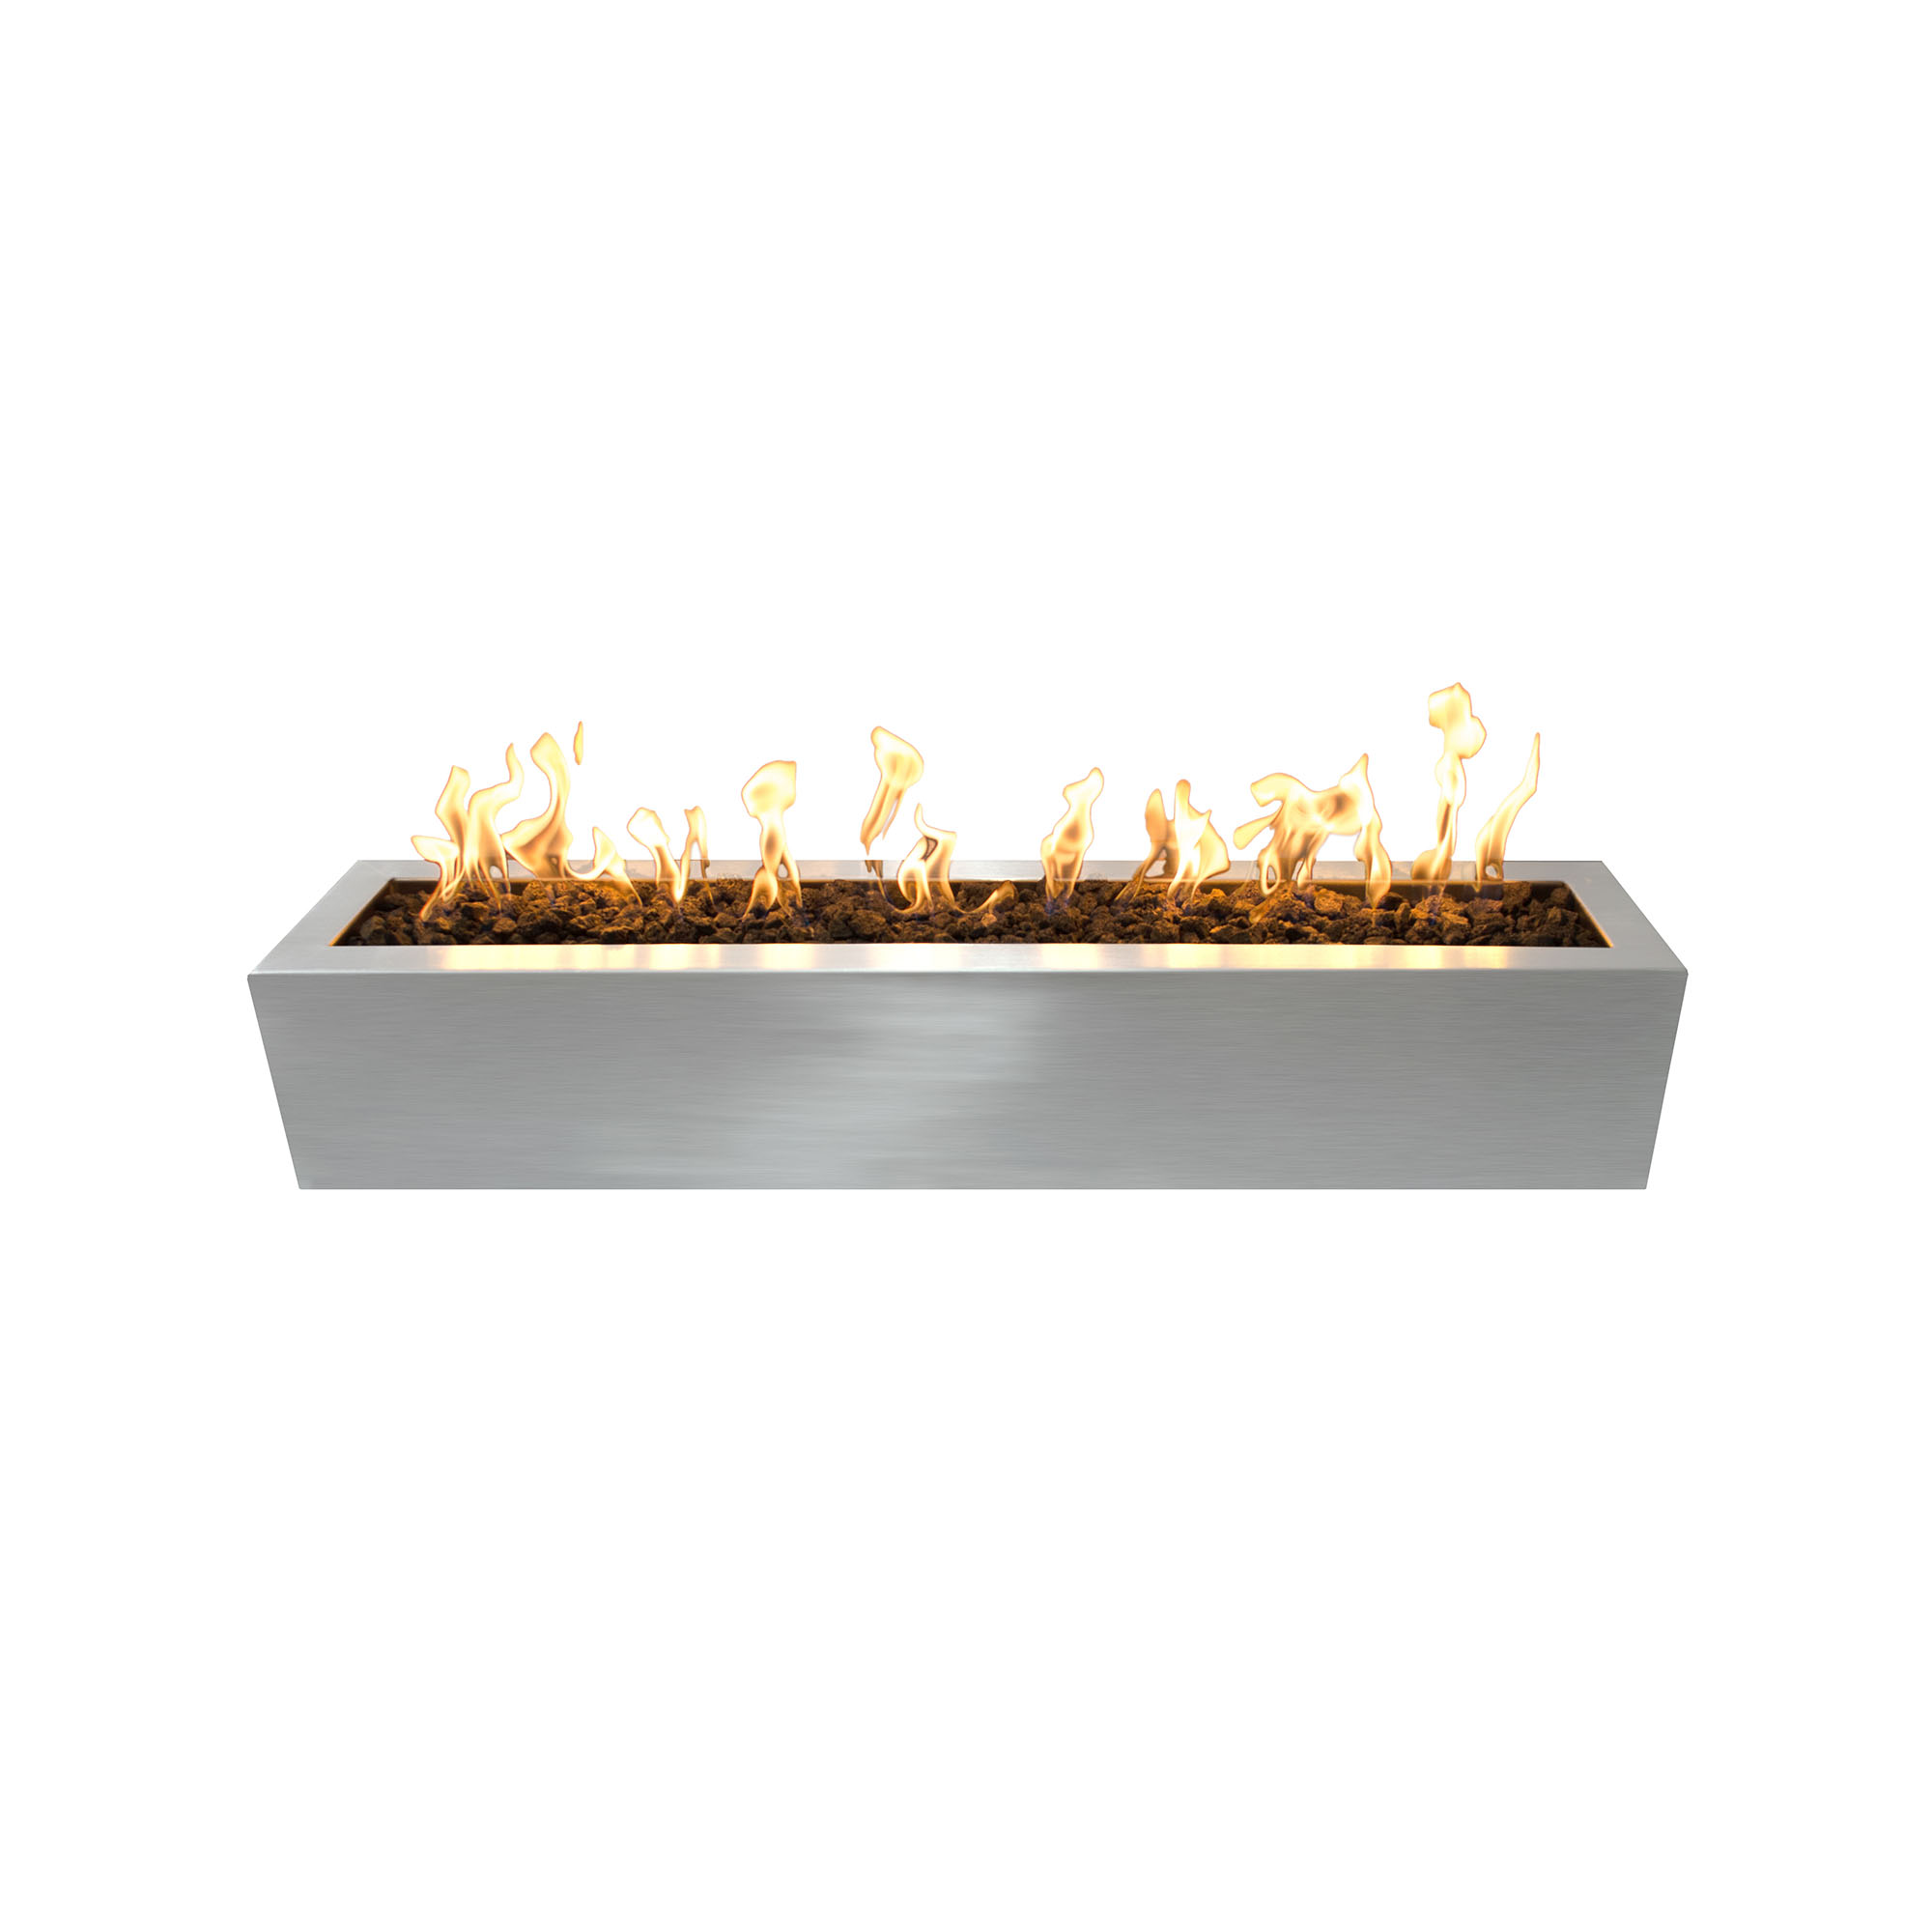 Eaves Fire Pit - Stainless Steel